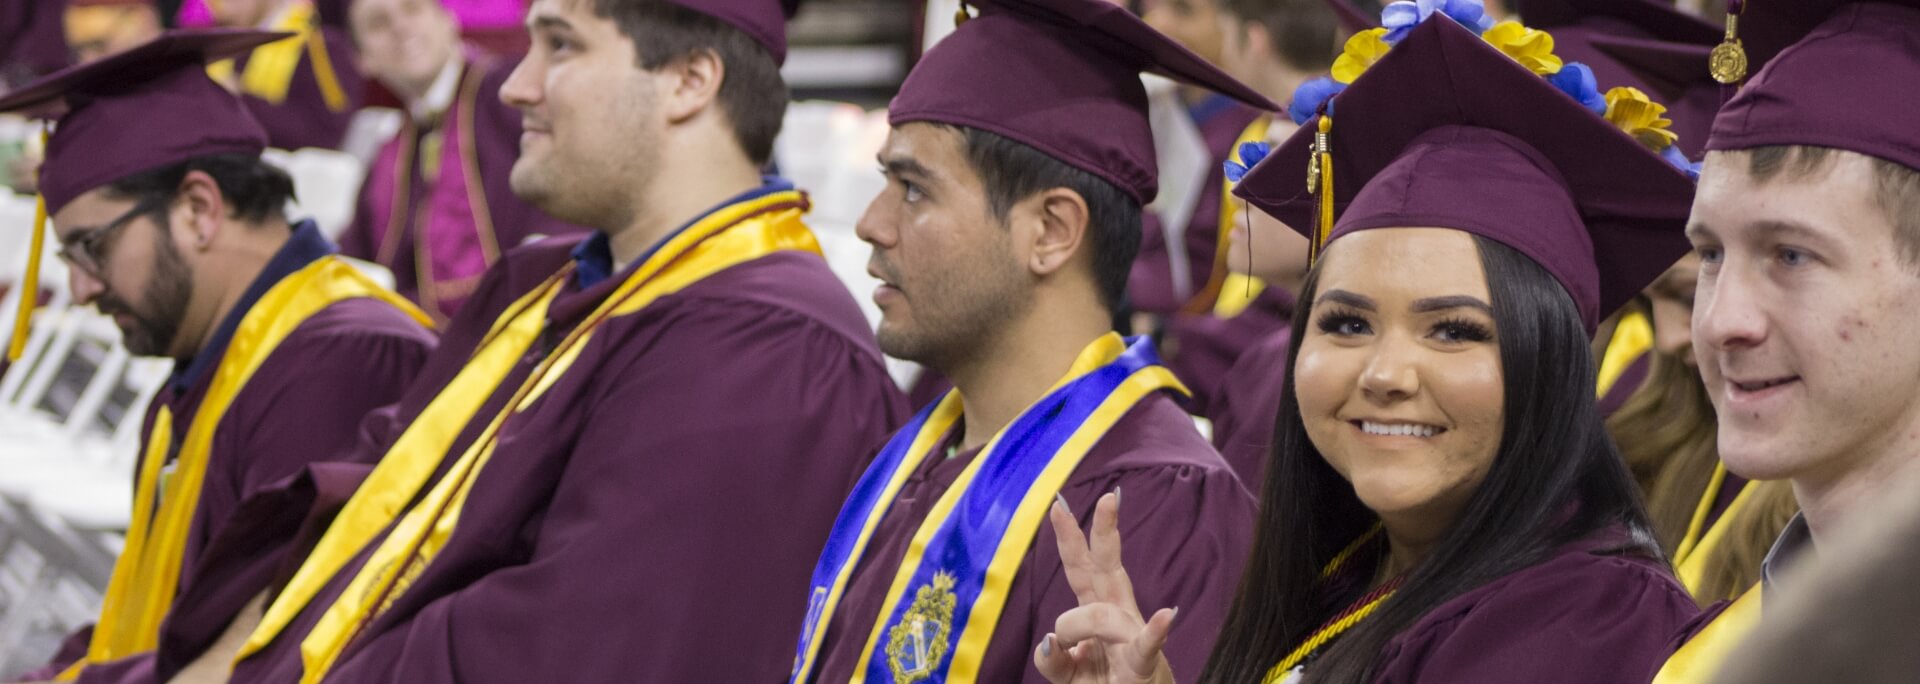 A student looks at the camera and smiles at convocation wearing her graduation cap and gown.